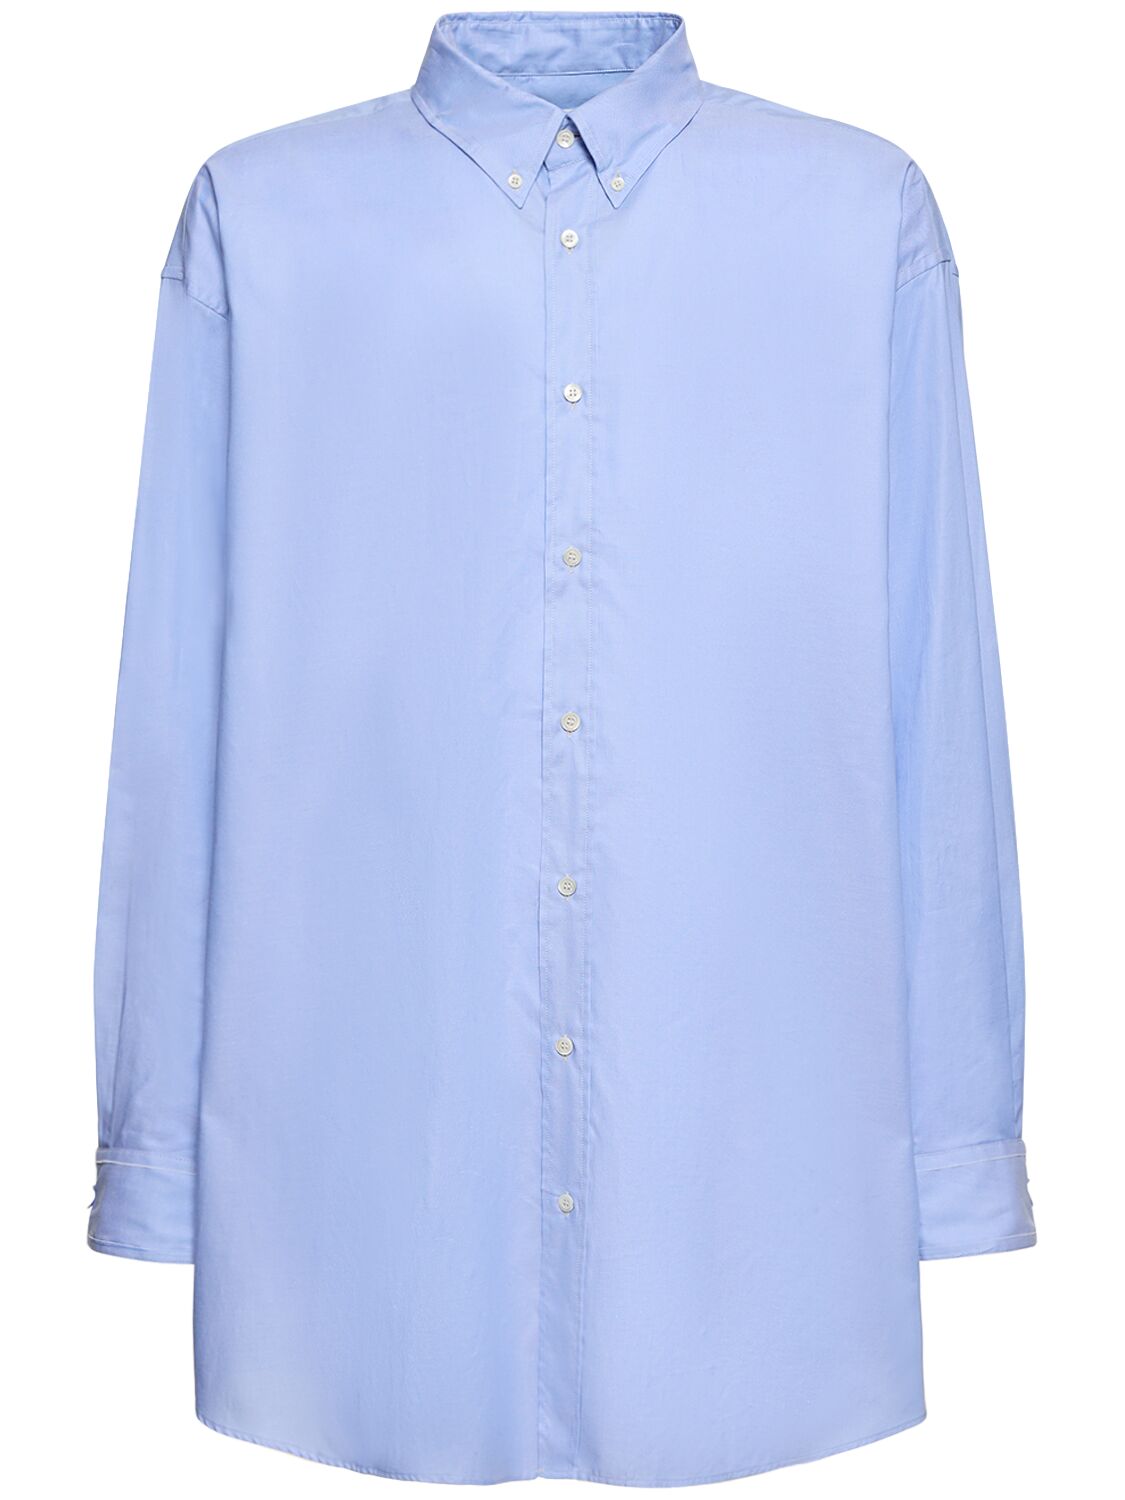 Image of Oversize Classic Button Down Shirt